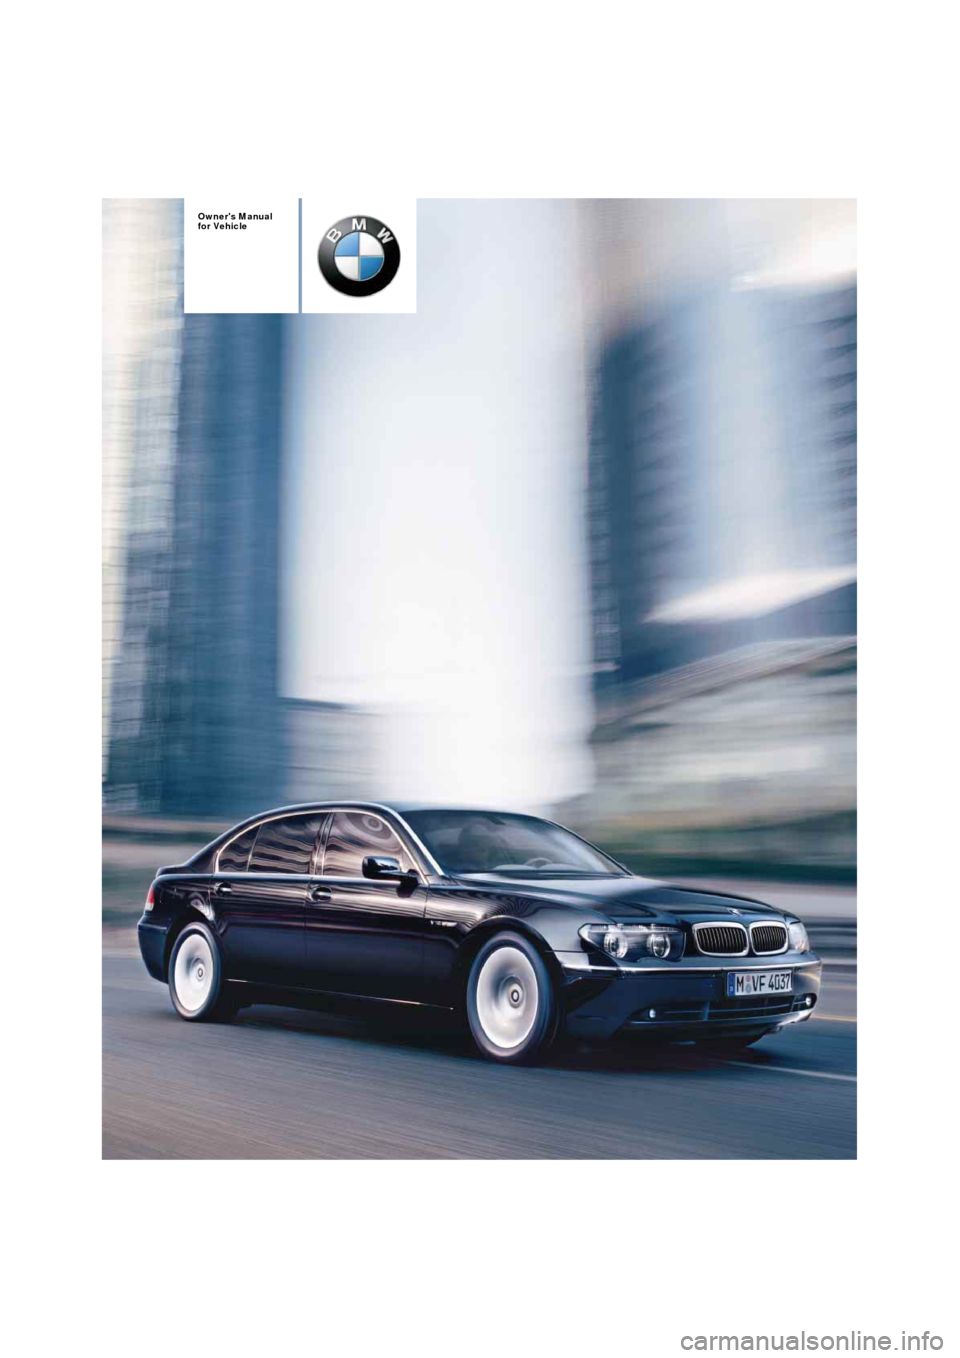 BMW 745i 2004 E65 Owners Manual  
Owners Manual
for Vehicle 